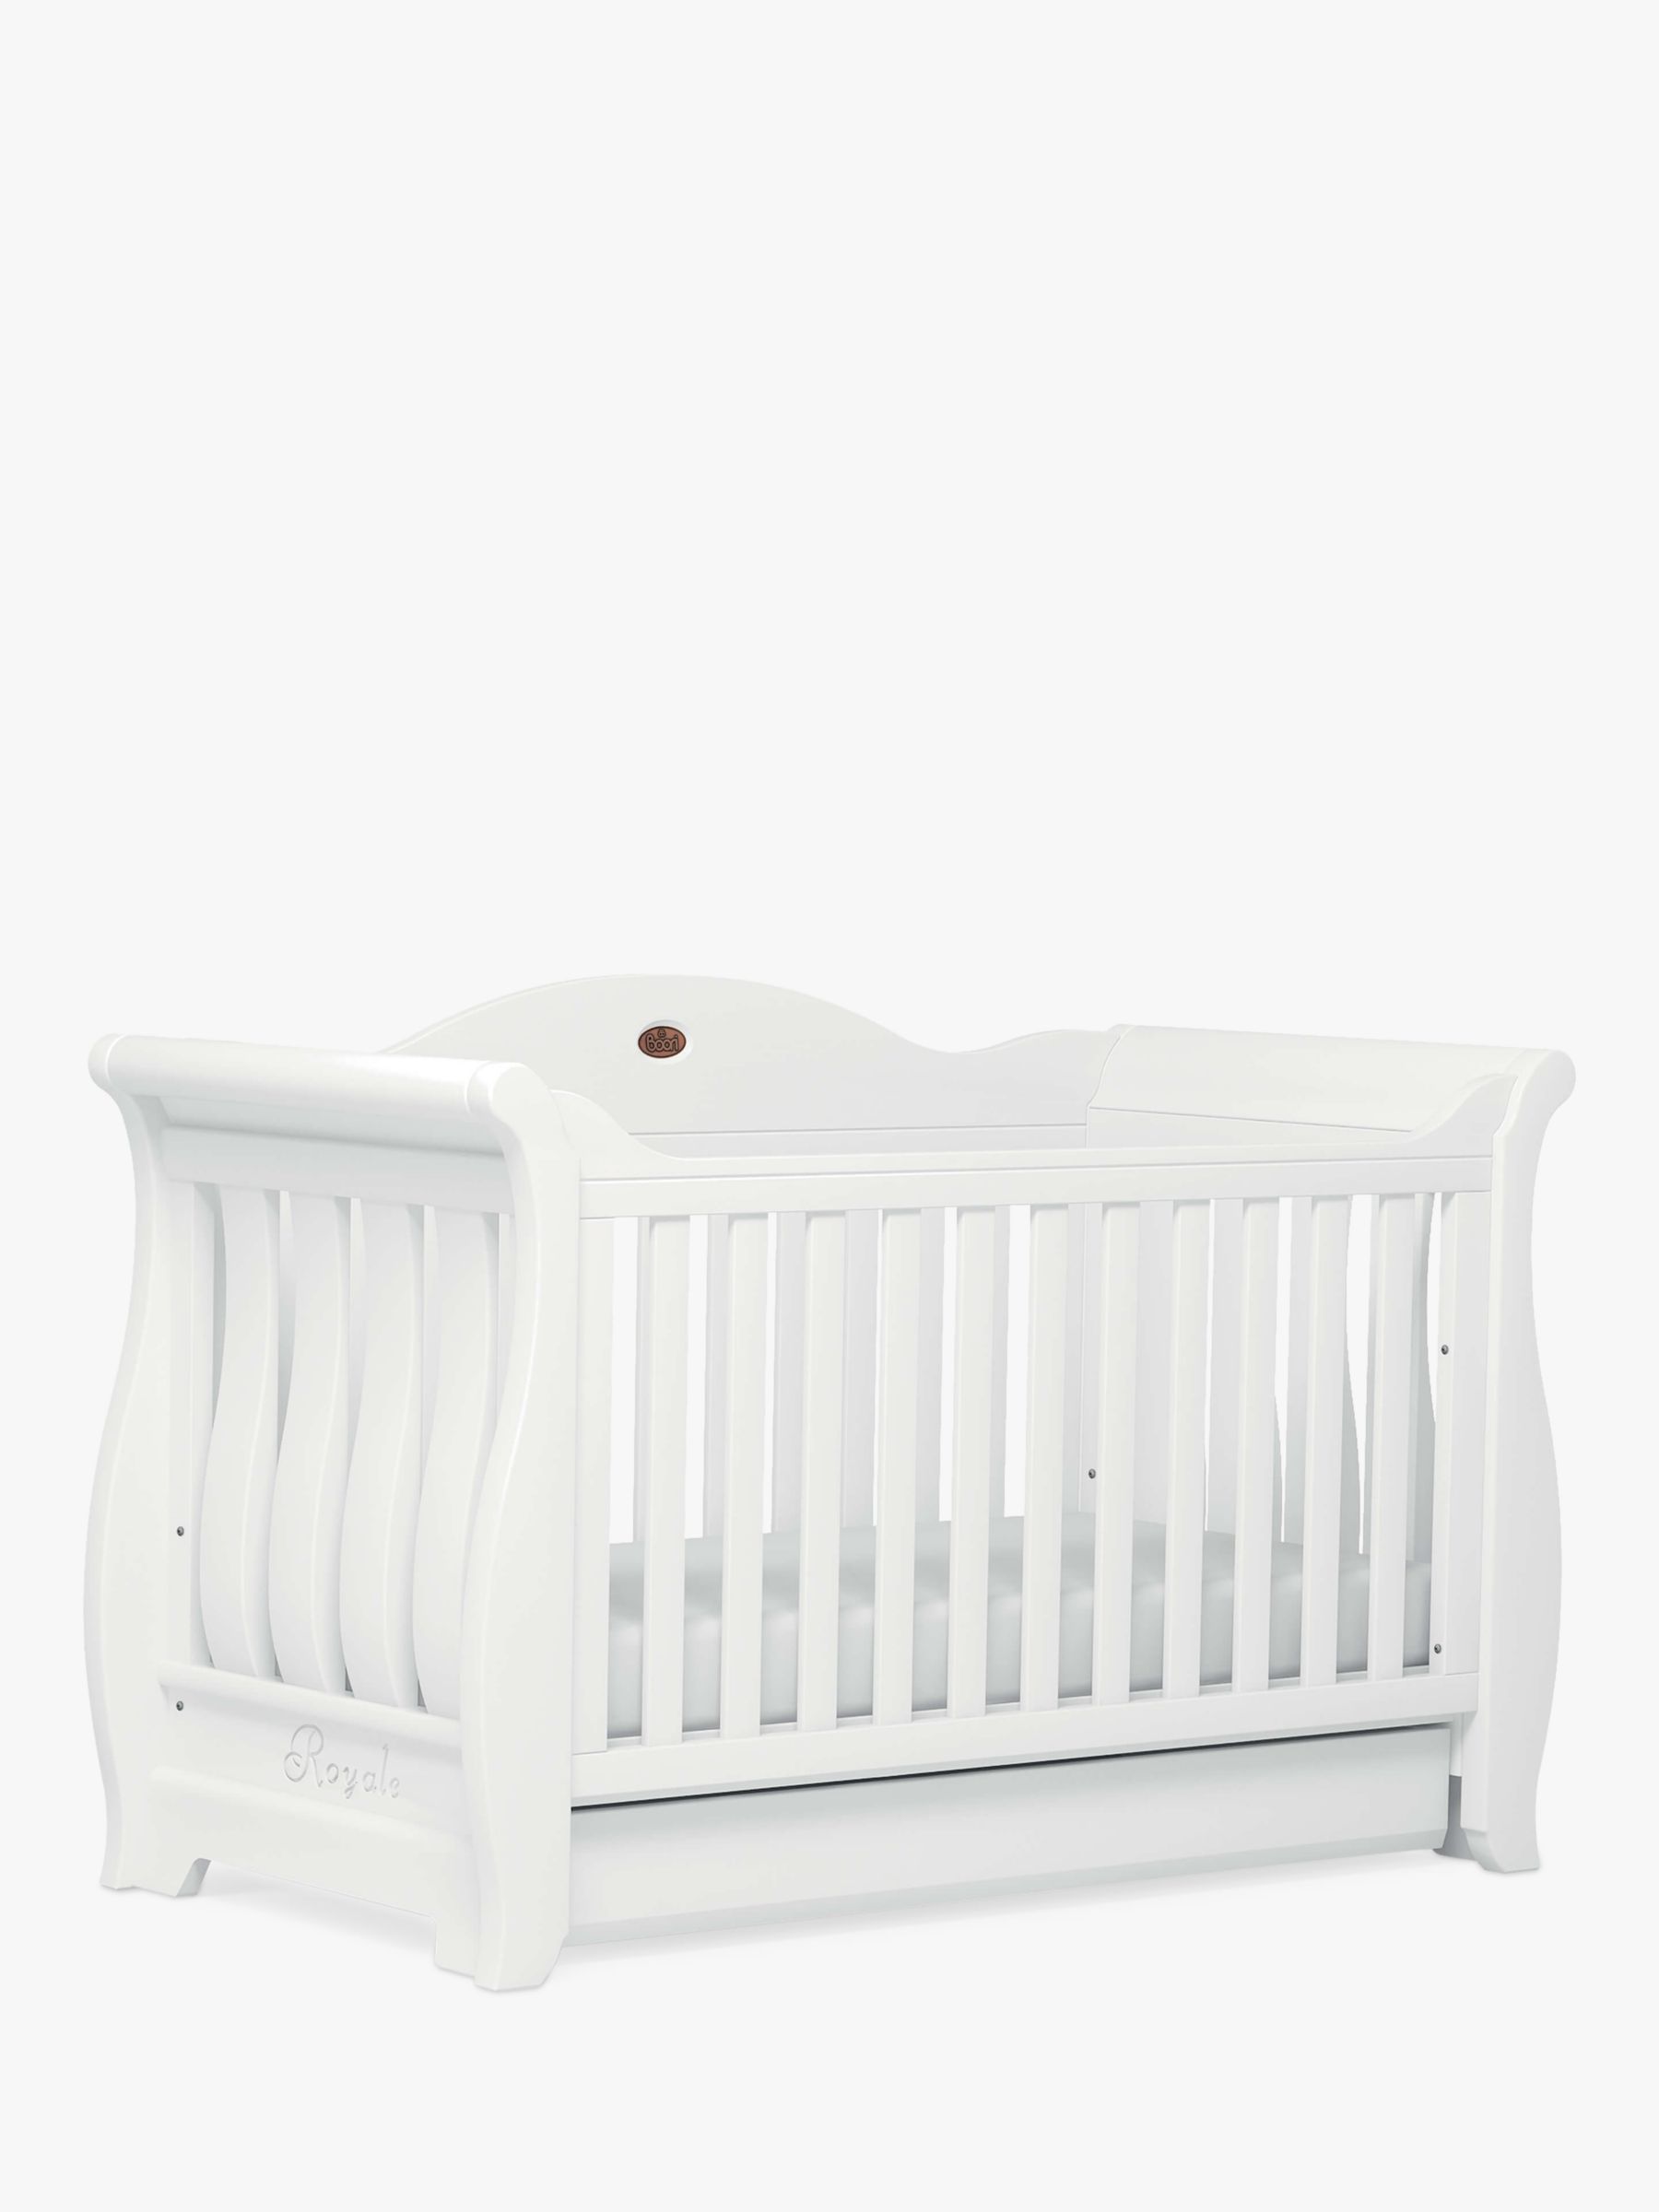 Boori Sleigh Royale Cot/Cotbed, White at John Lewis